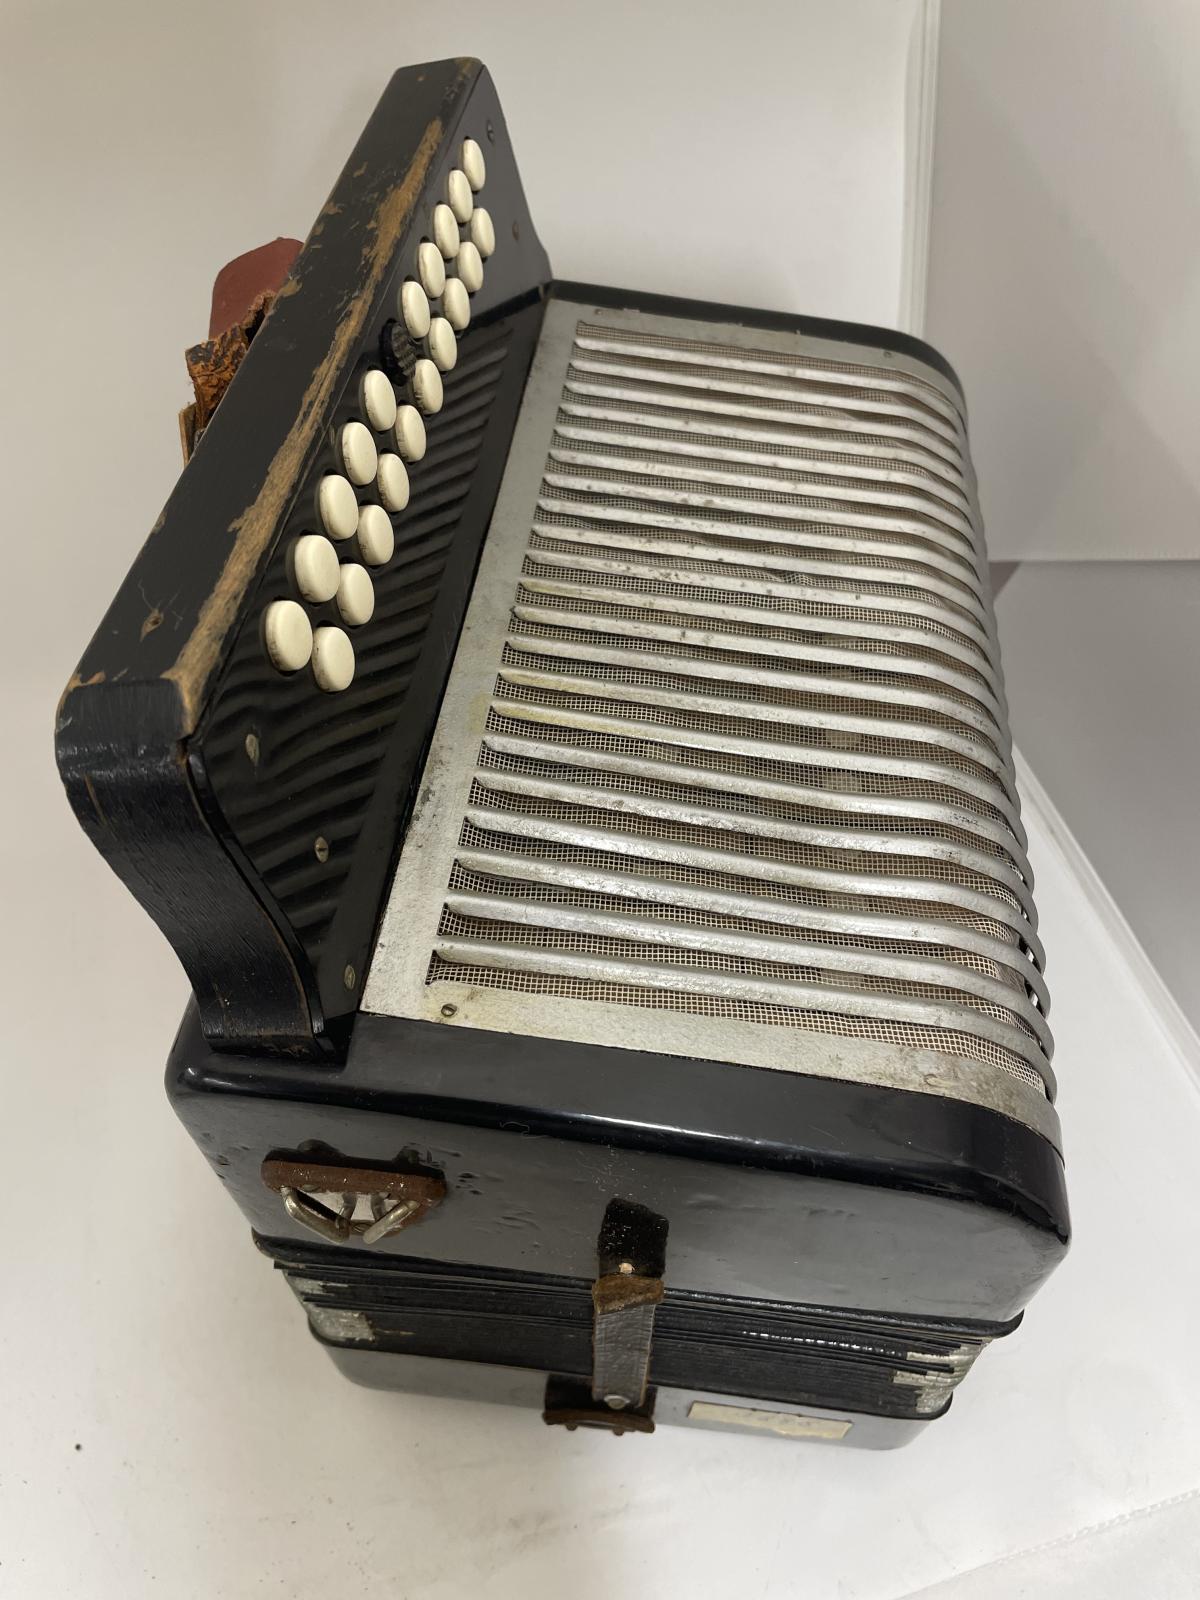 The metal grill above the flywire screen that protects the reeds in the Hohner Button Accordion